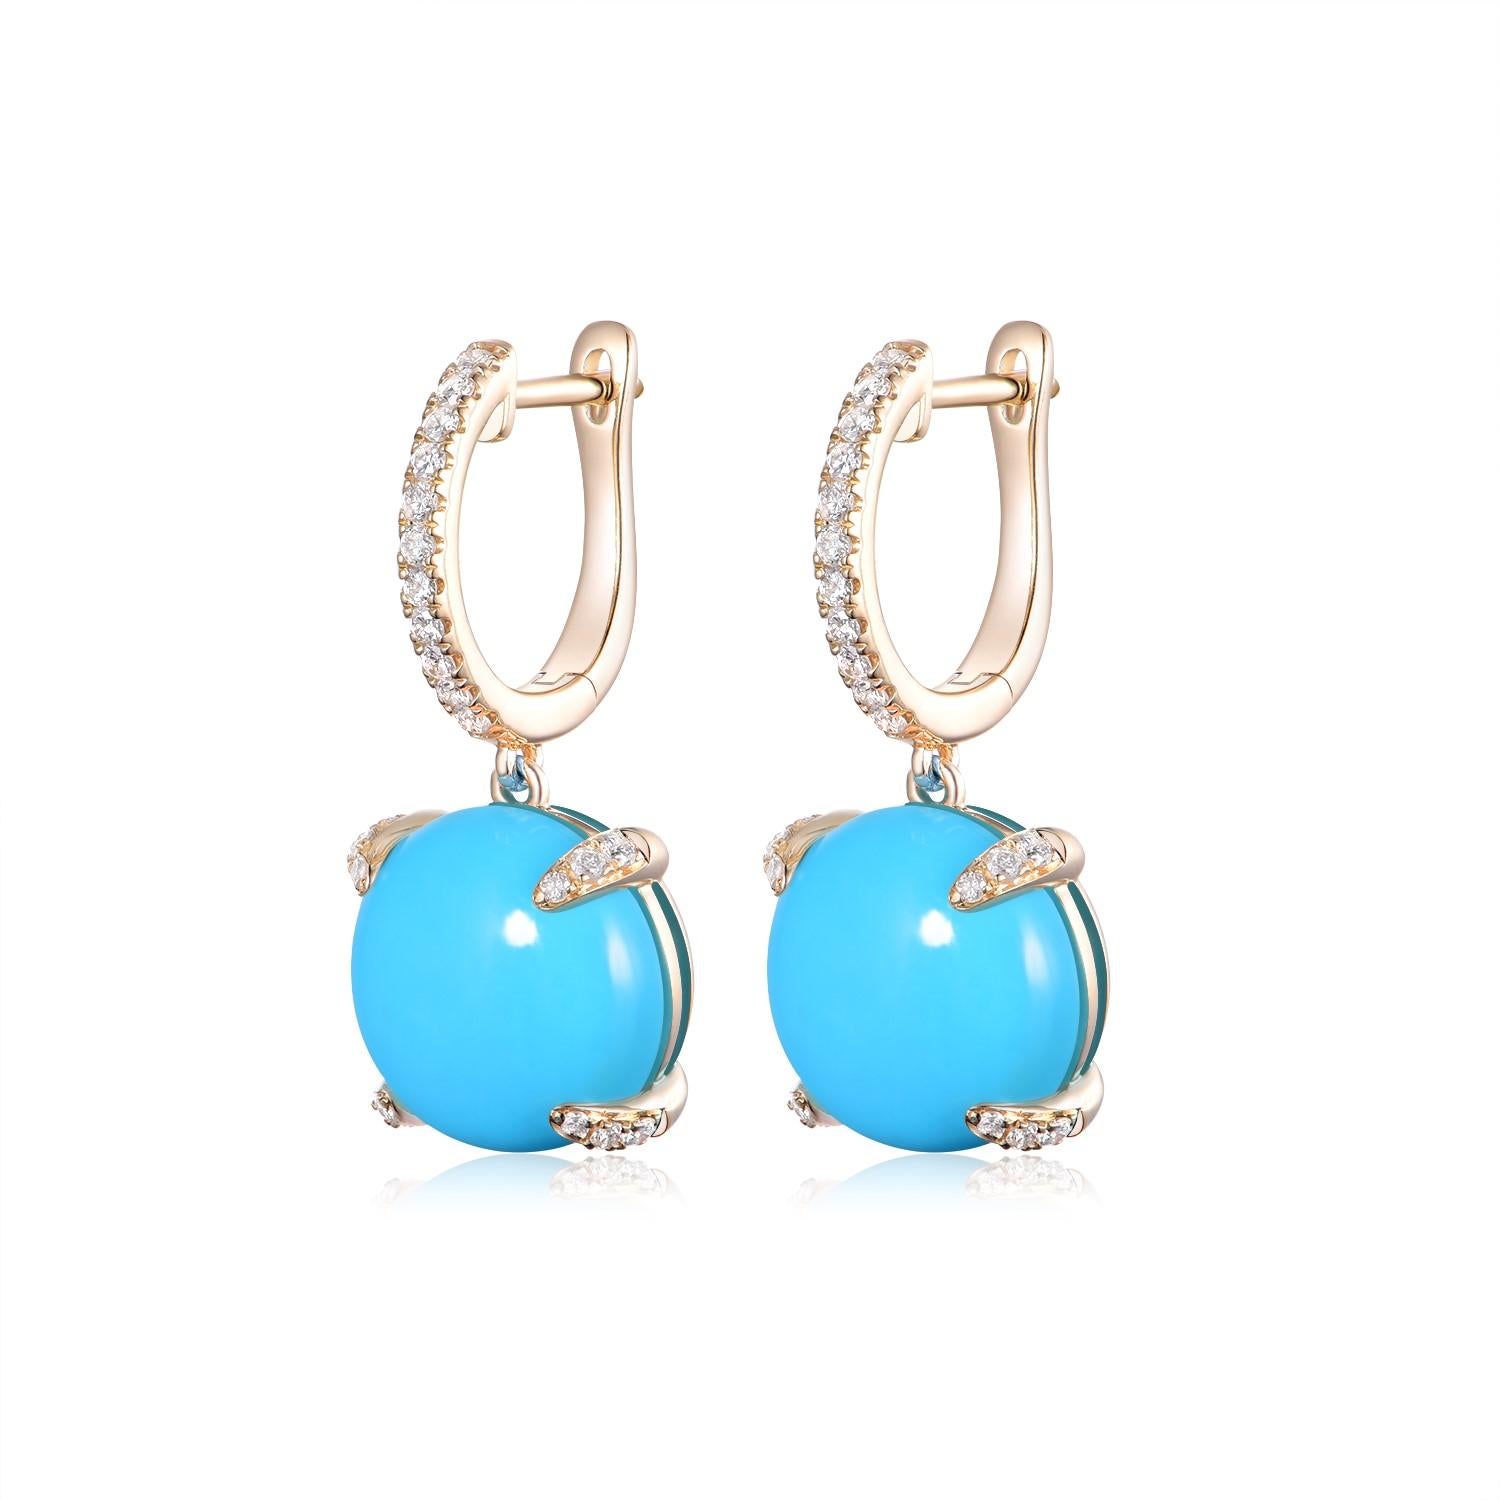 Showcased in this image is a pair of Turquoise and Diamond Drop Earrings in 14K Yellow Gold. Each earring features a substantial 10.55 carat turquoise, presenting a vivid blue hue reminiscent of tropical seas. The turquoise is fashioned into a